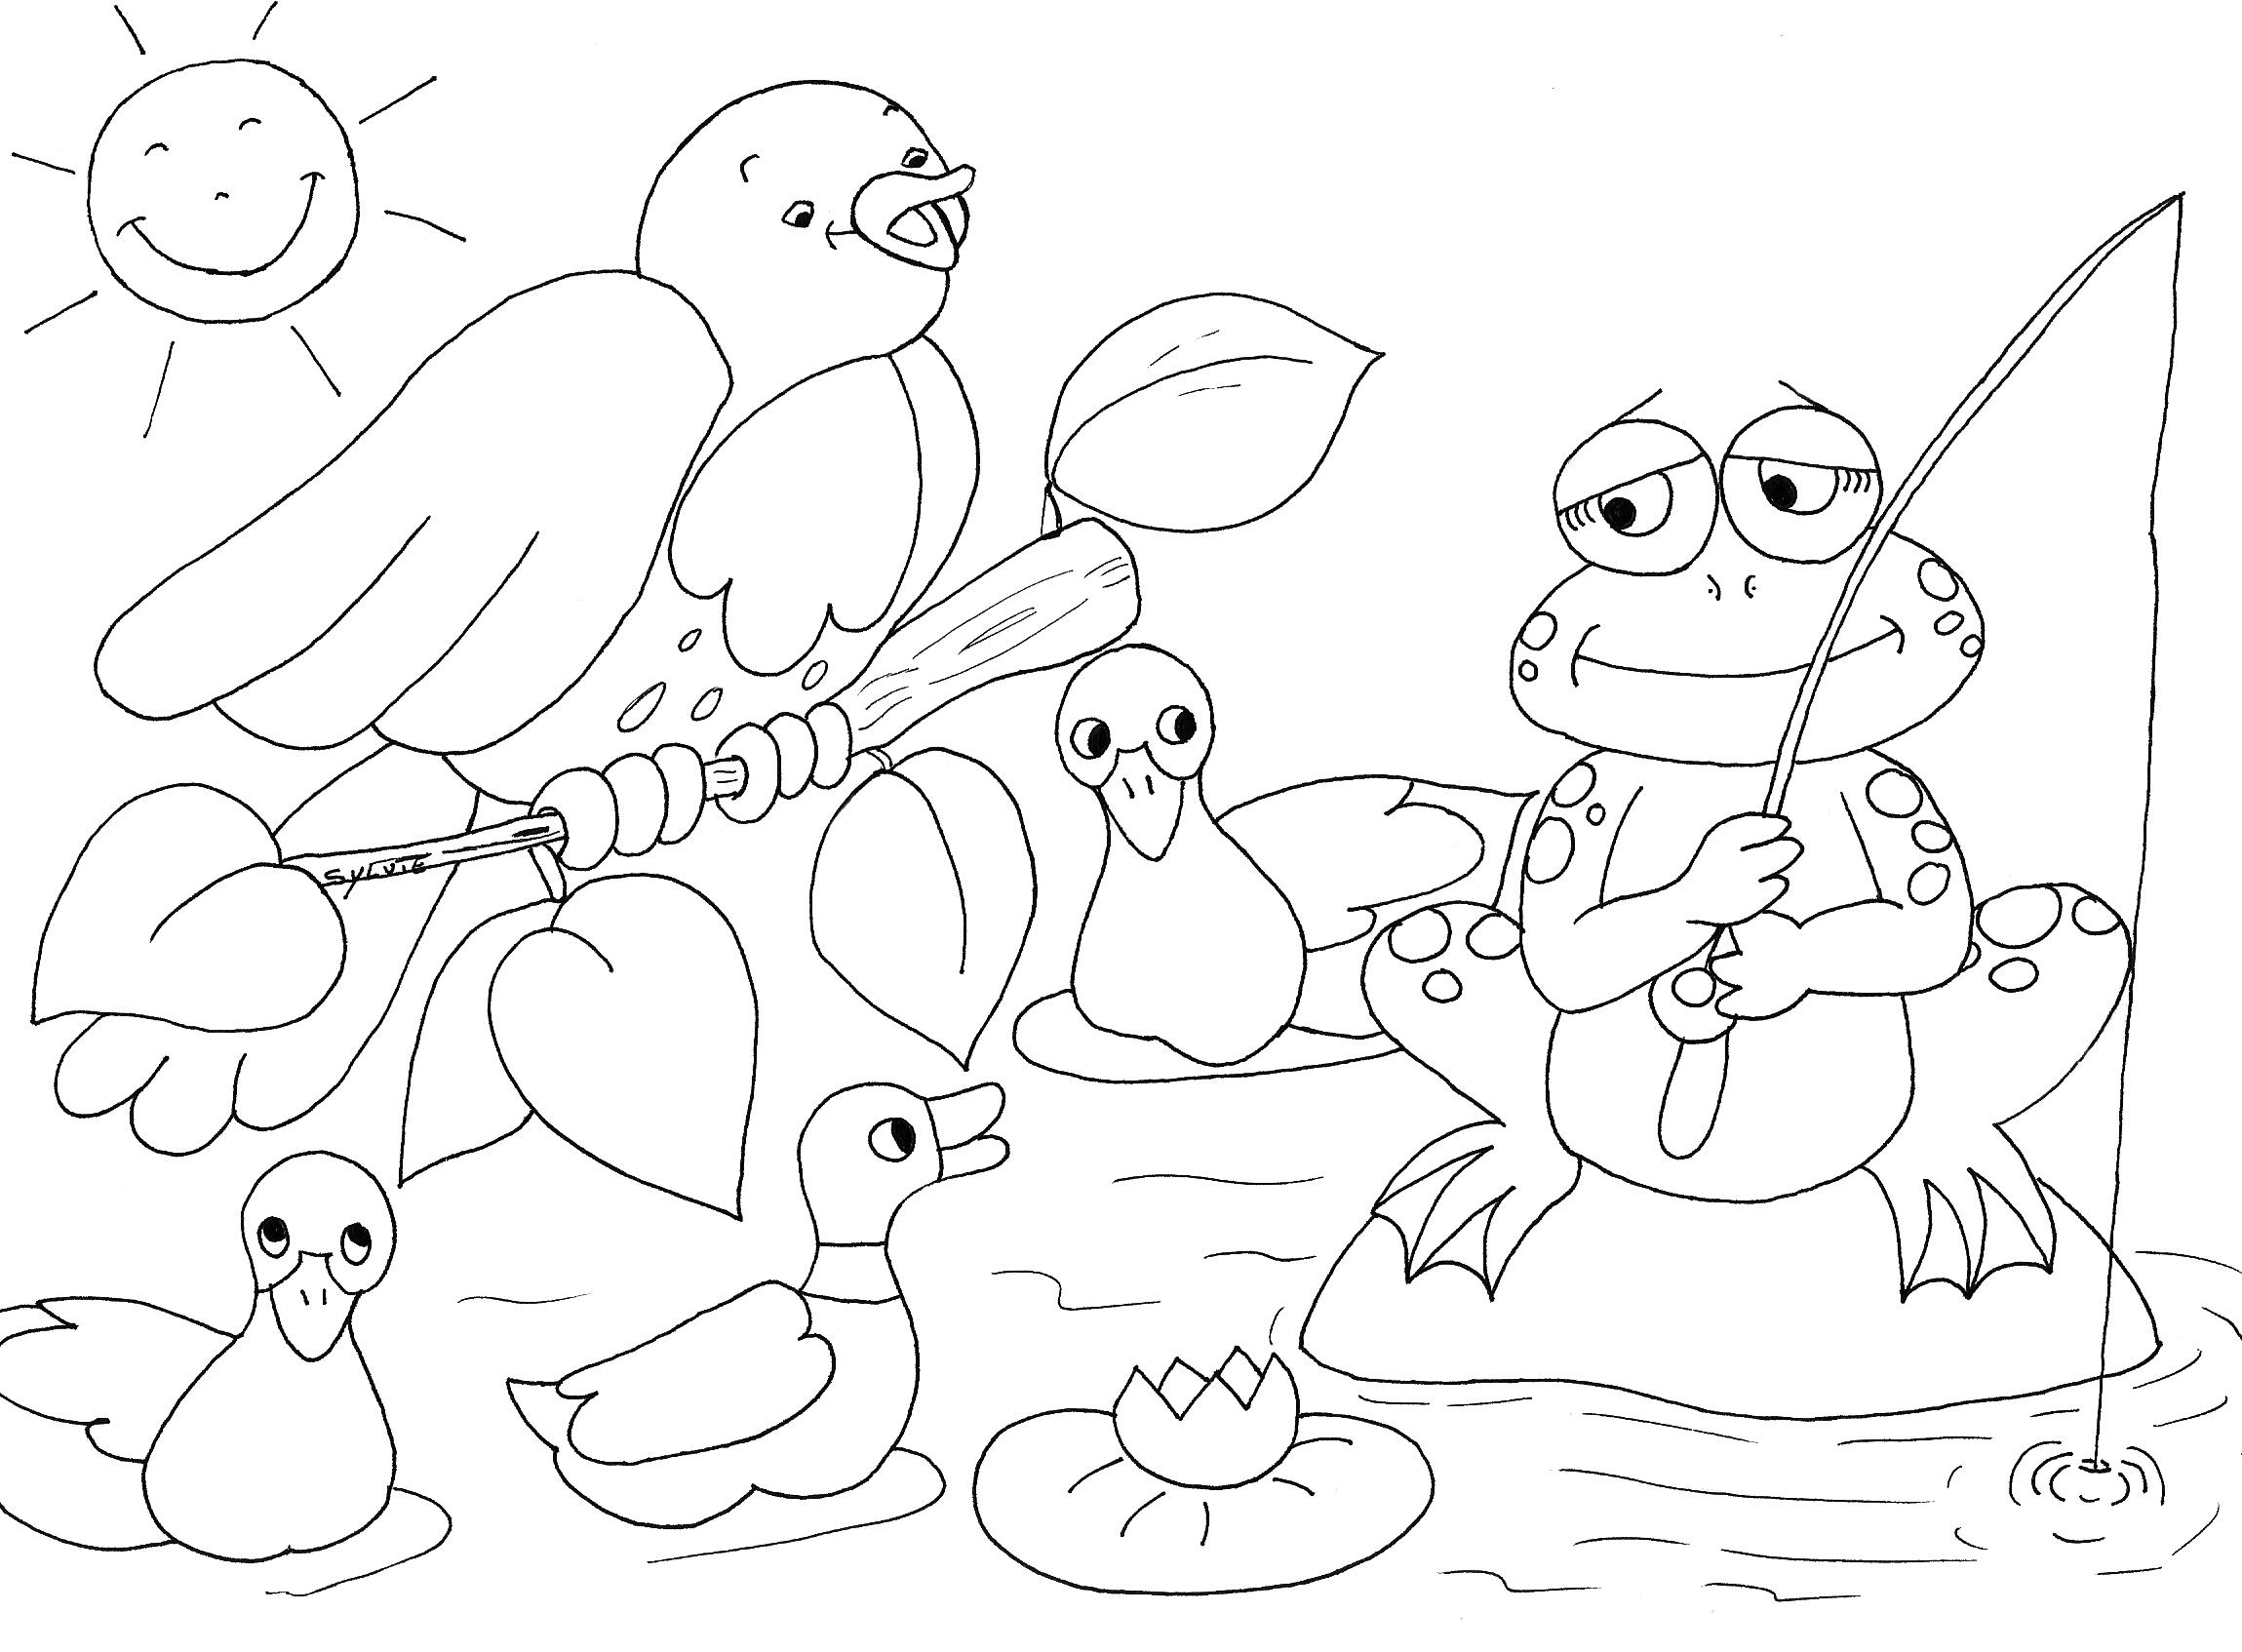 Animals In A Lake coloring page